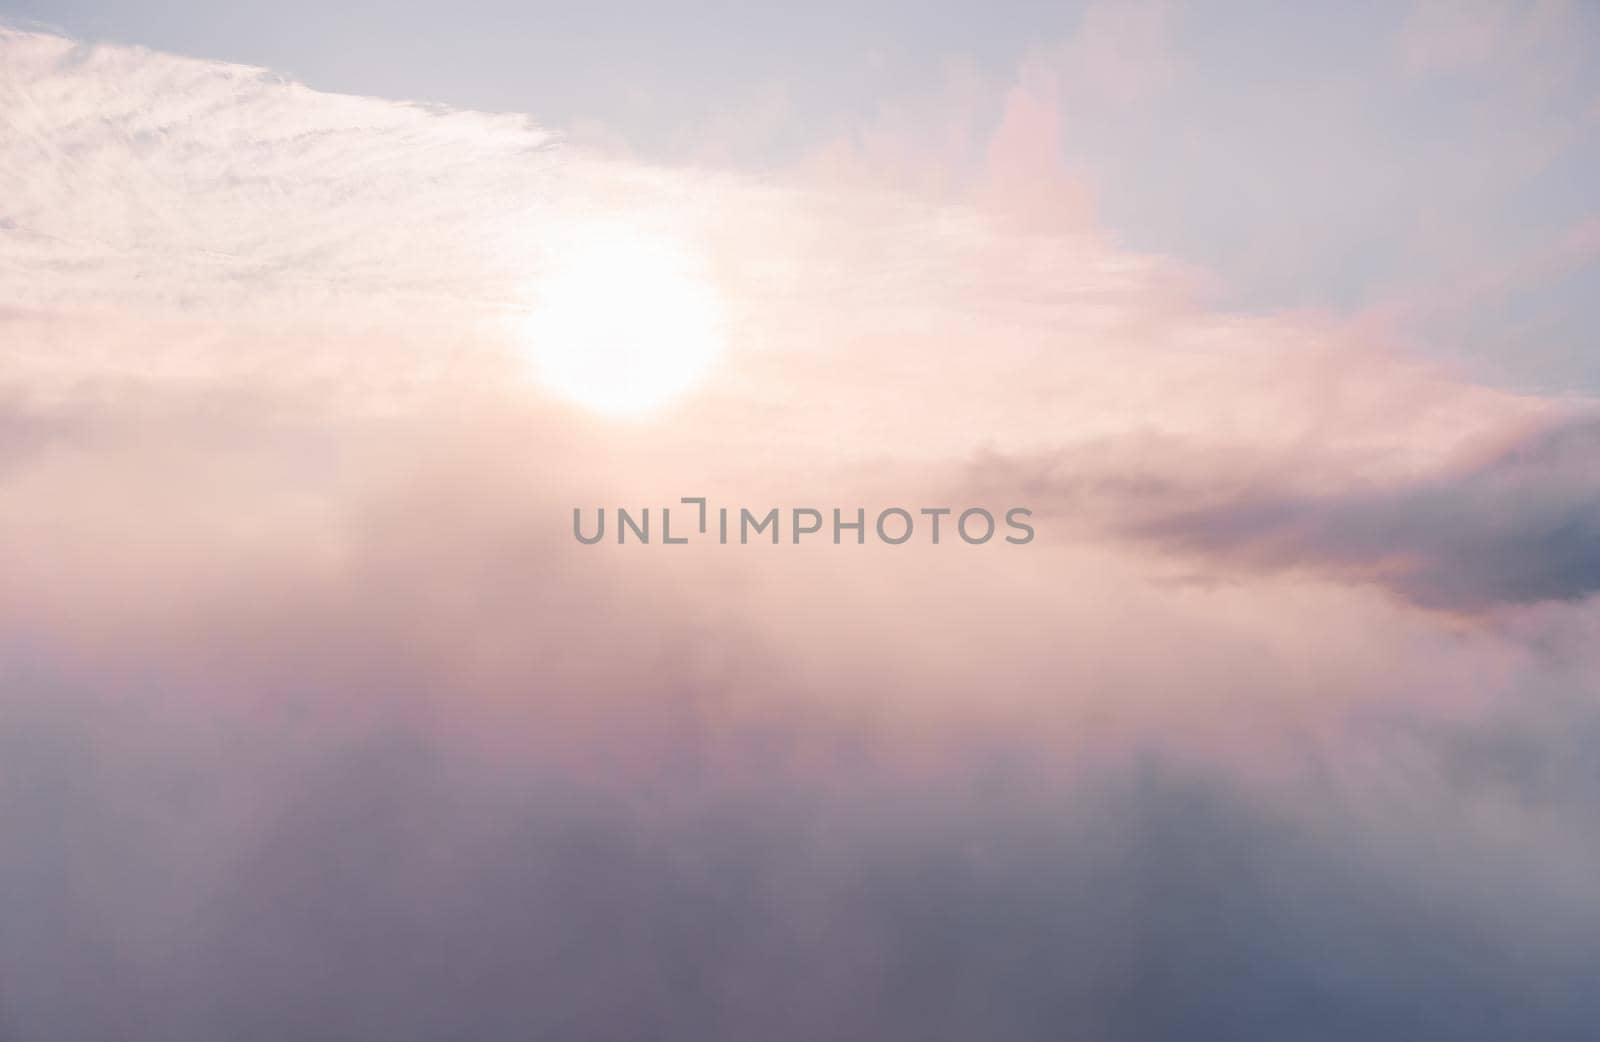 Aerial view drone flying above white clouds dense fog move quickly. Drone flies high back in blue sky through fluffy clouds. Beautiful foggy and cloudy slow moving Aerial view. Fog sea.